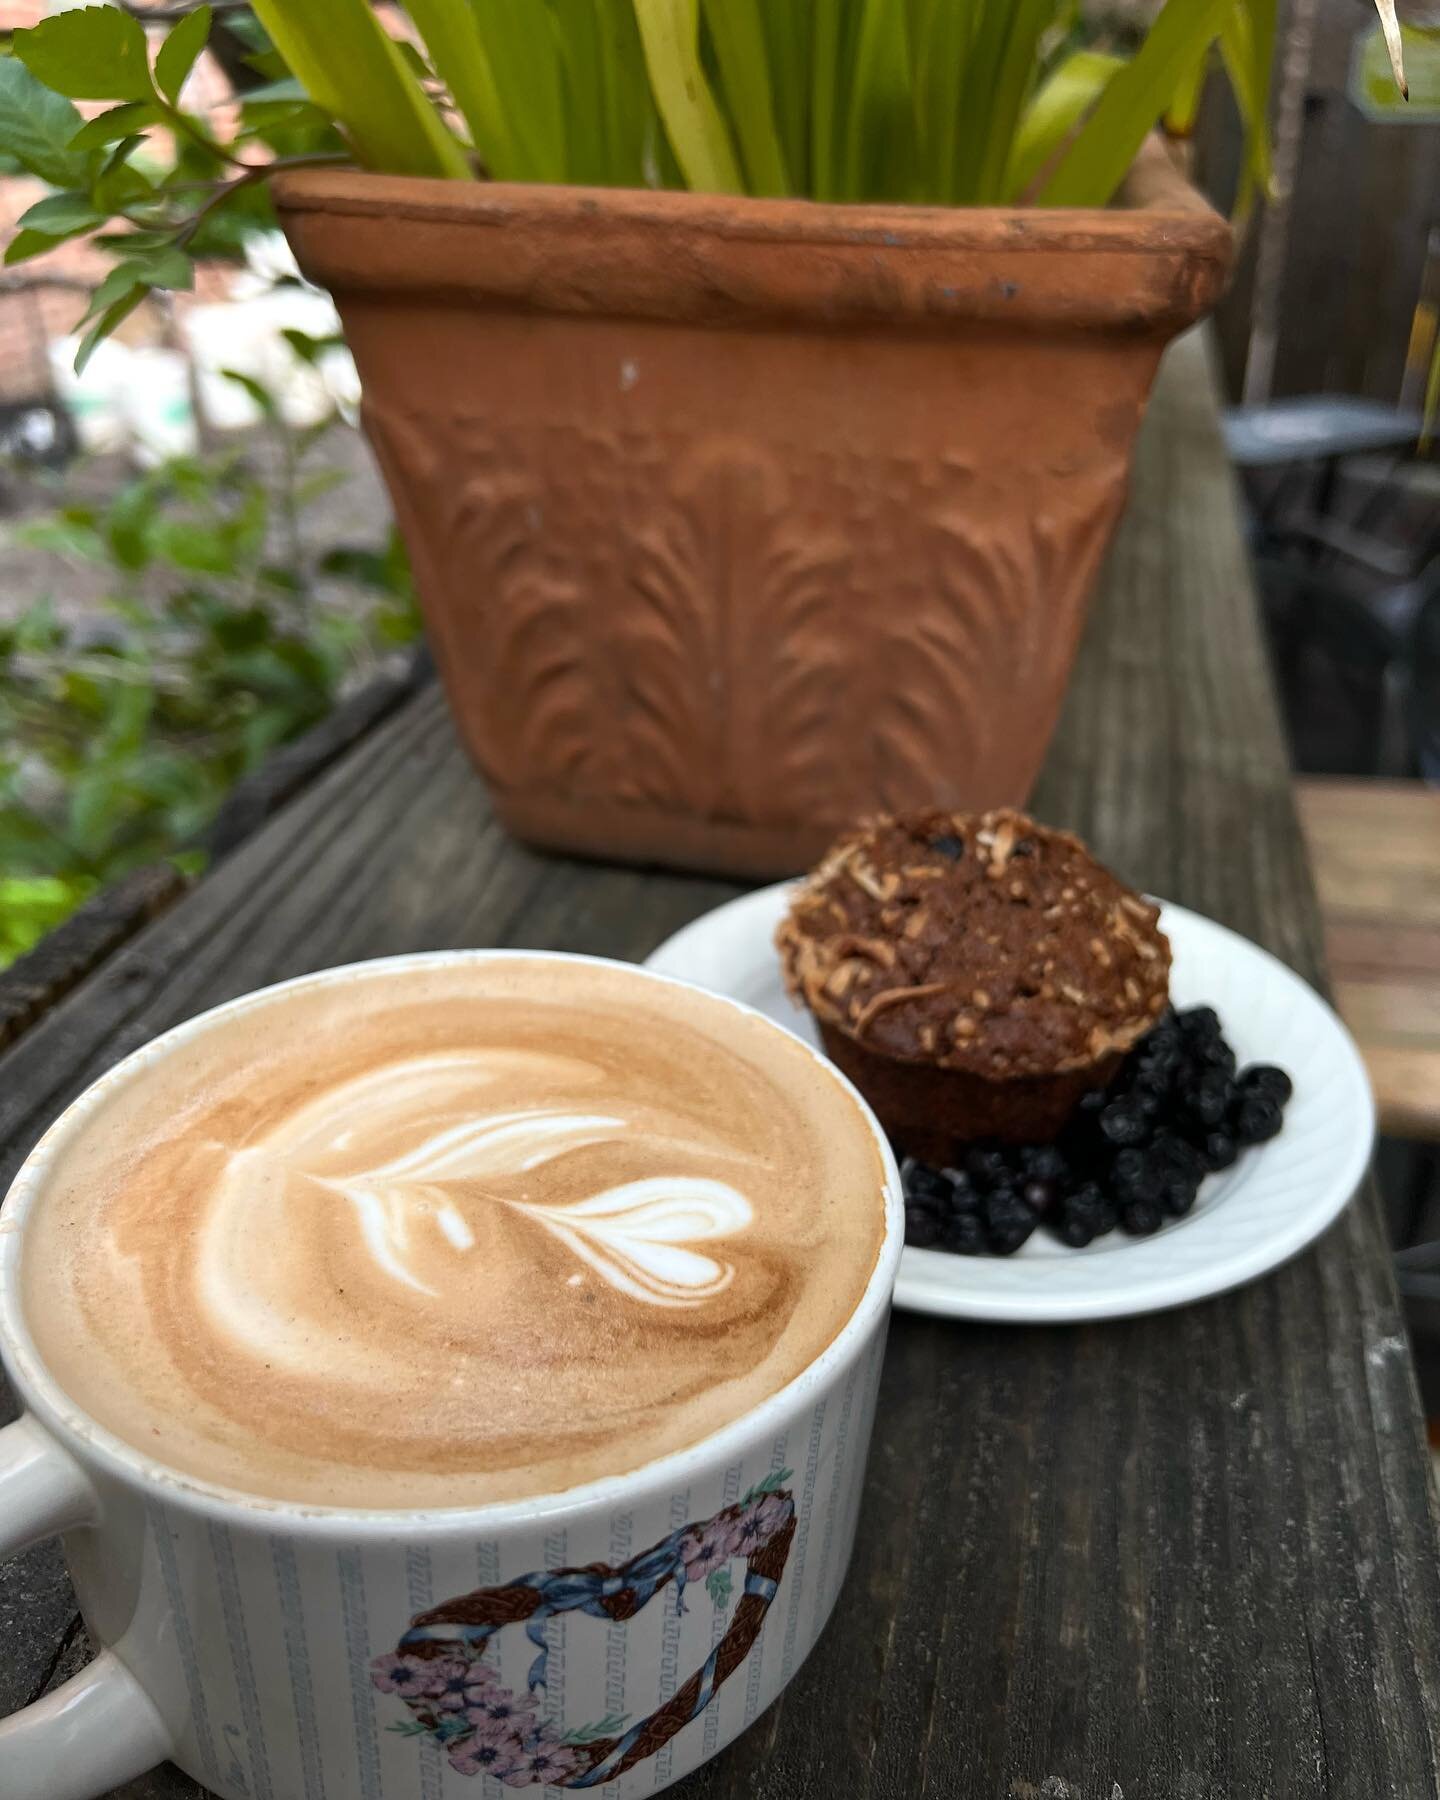 Dudes.. more muffins?!!?! Our blueberry chocolate muffins are literally sooo good with a mocha! &hellip;.. come see for yourself ☕️🍫